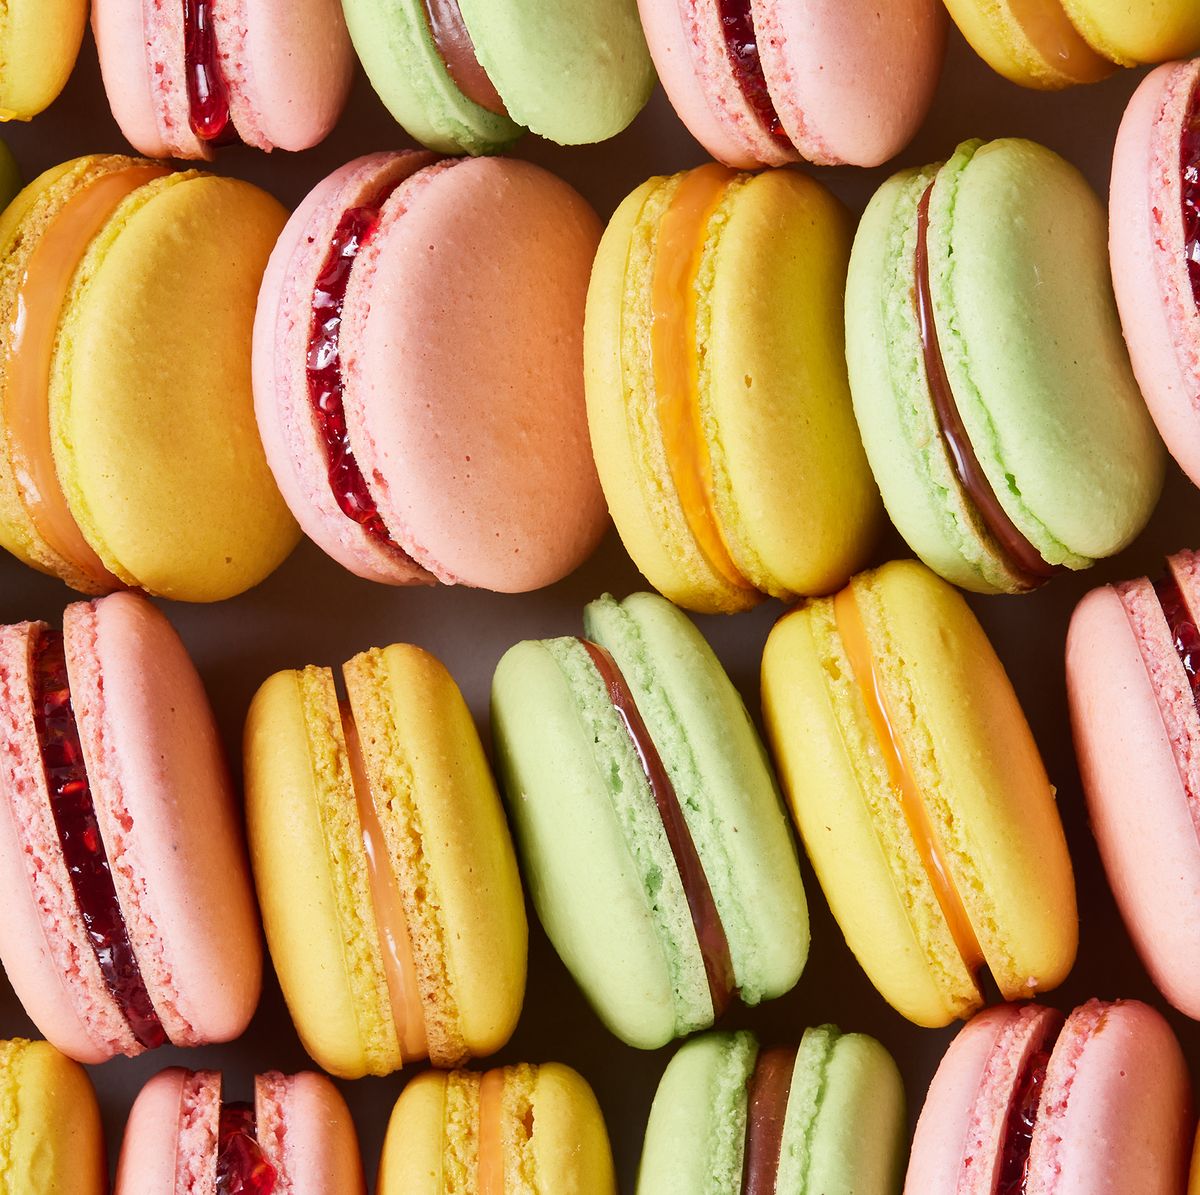 Best Macarons Recipe - How To Make French Macarons